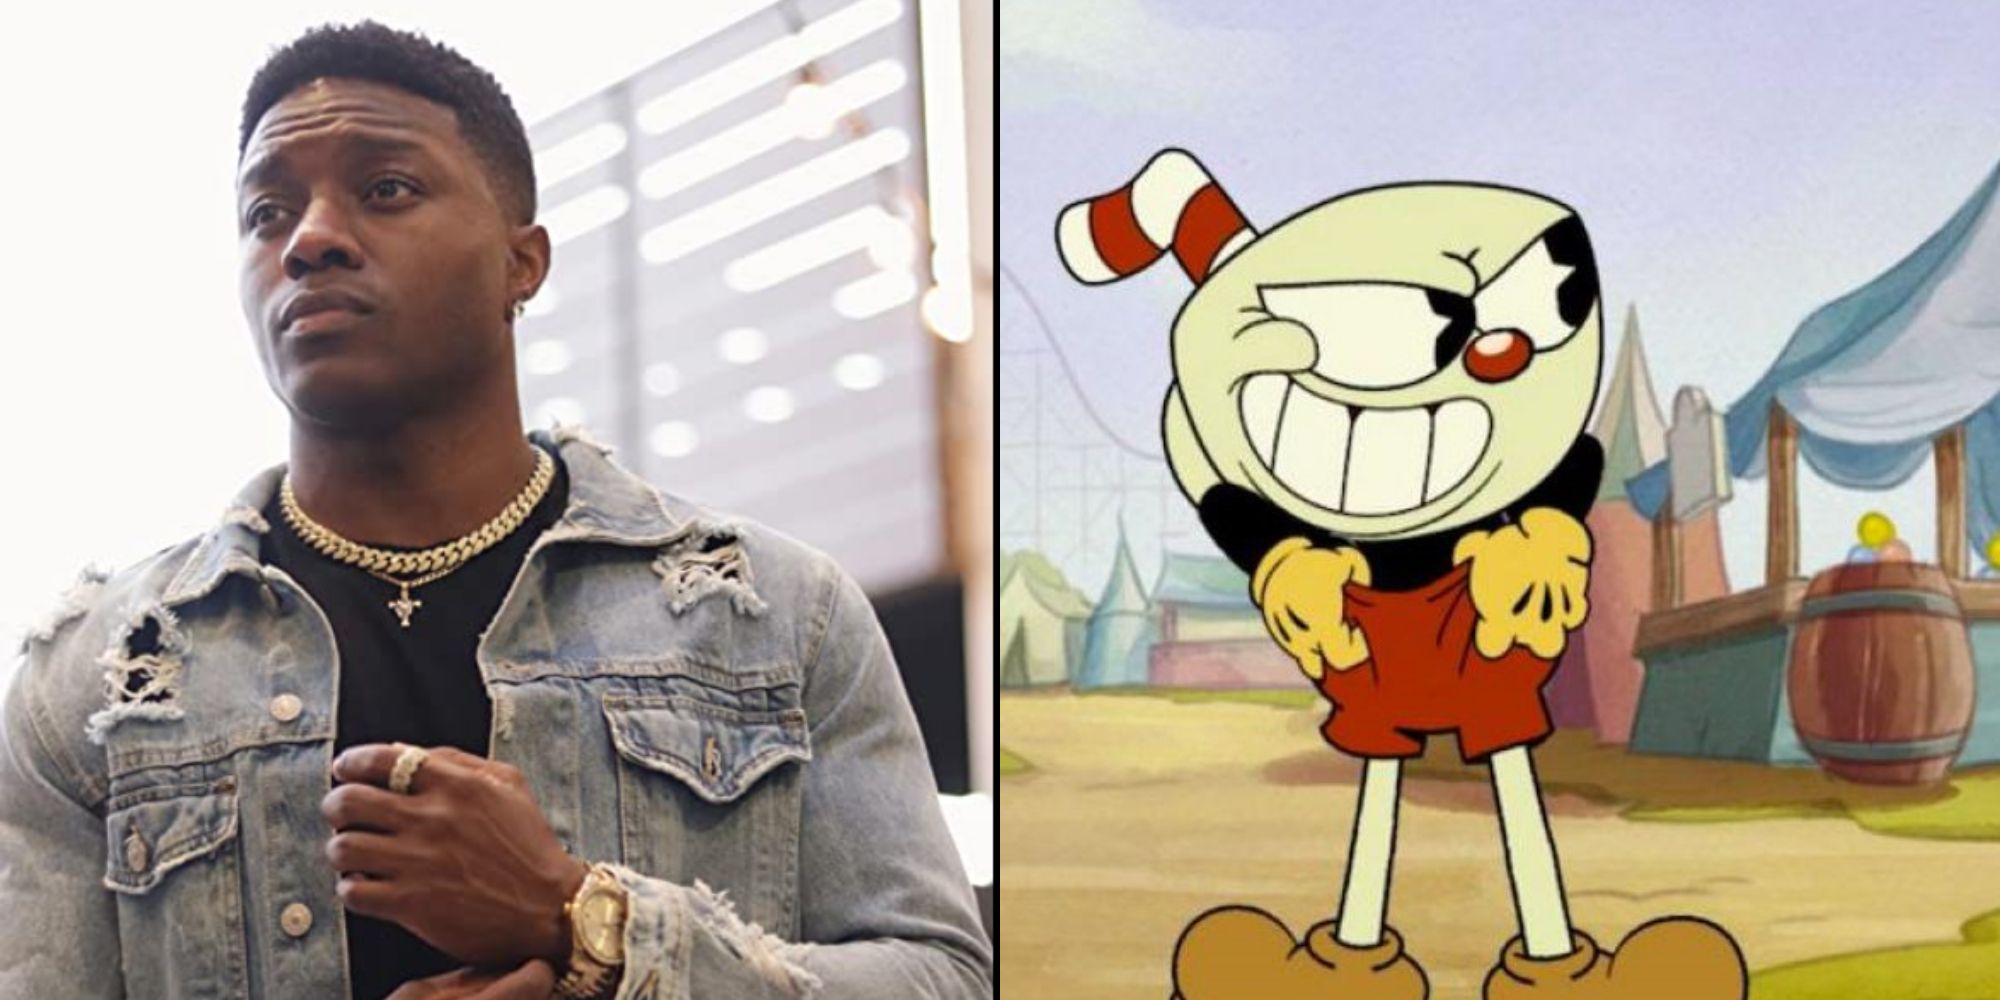 The Cuphead Show! Cast Guide: What The Voice Actors Look Like